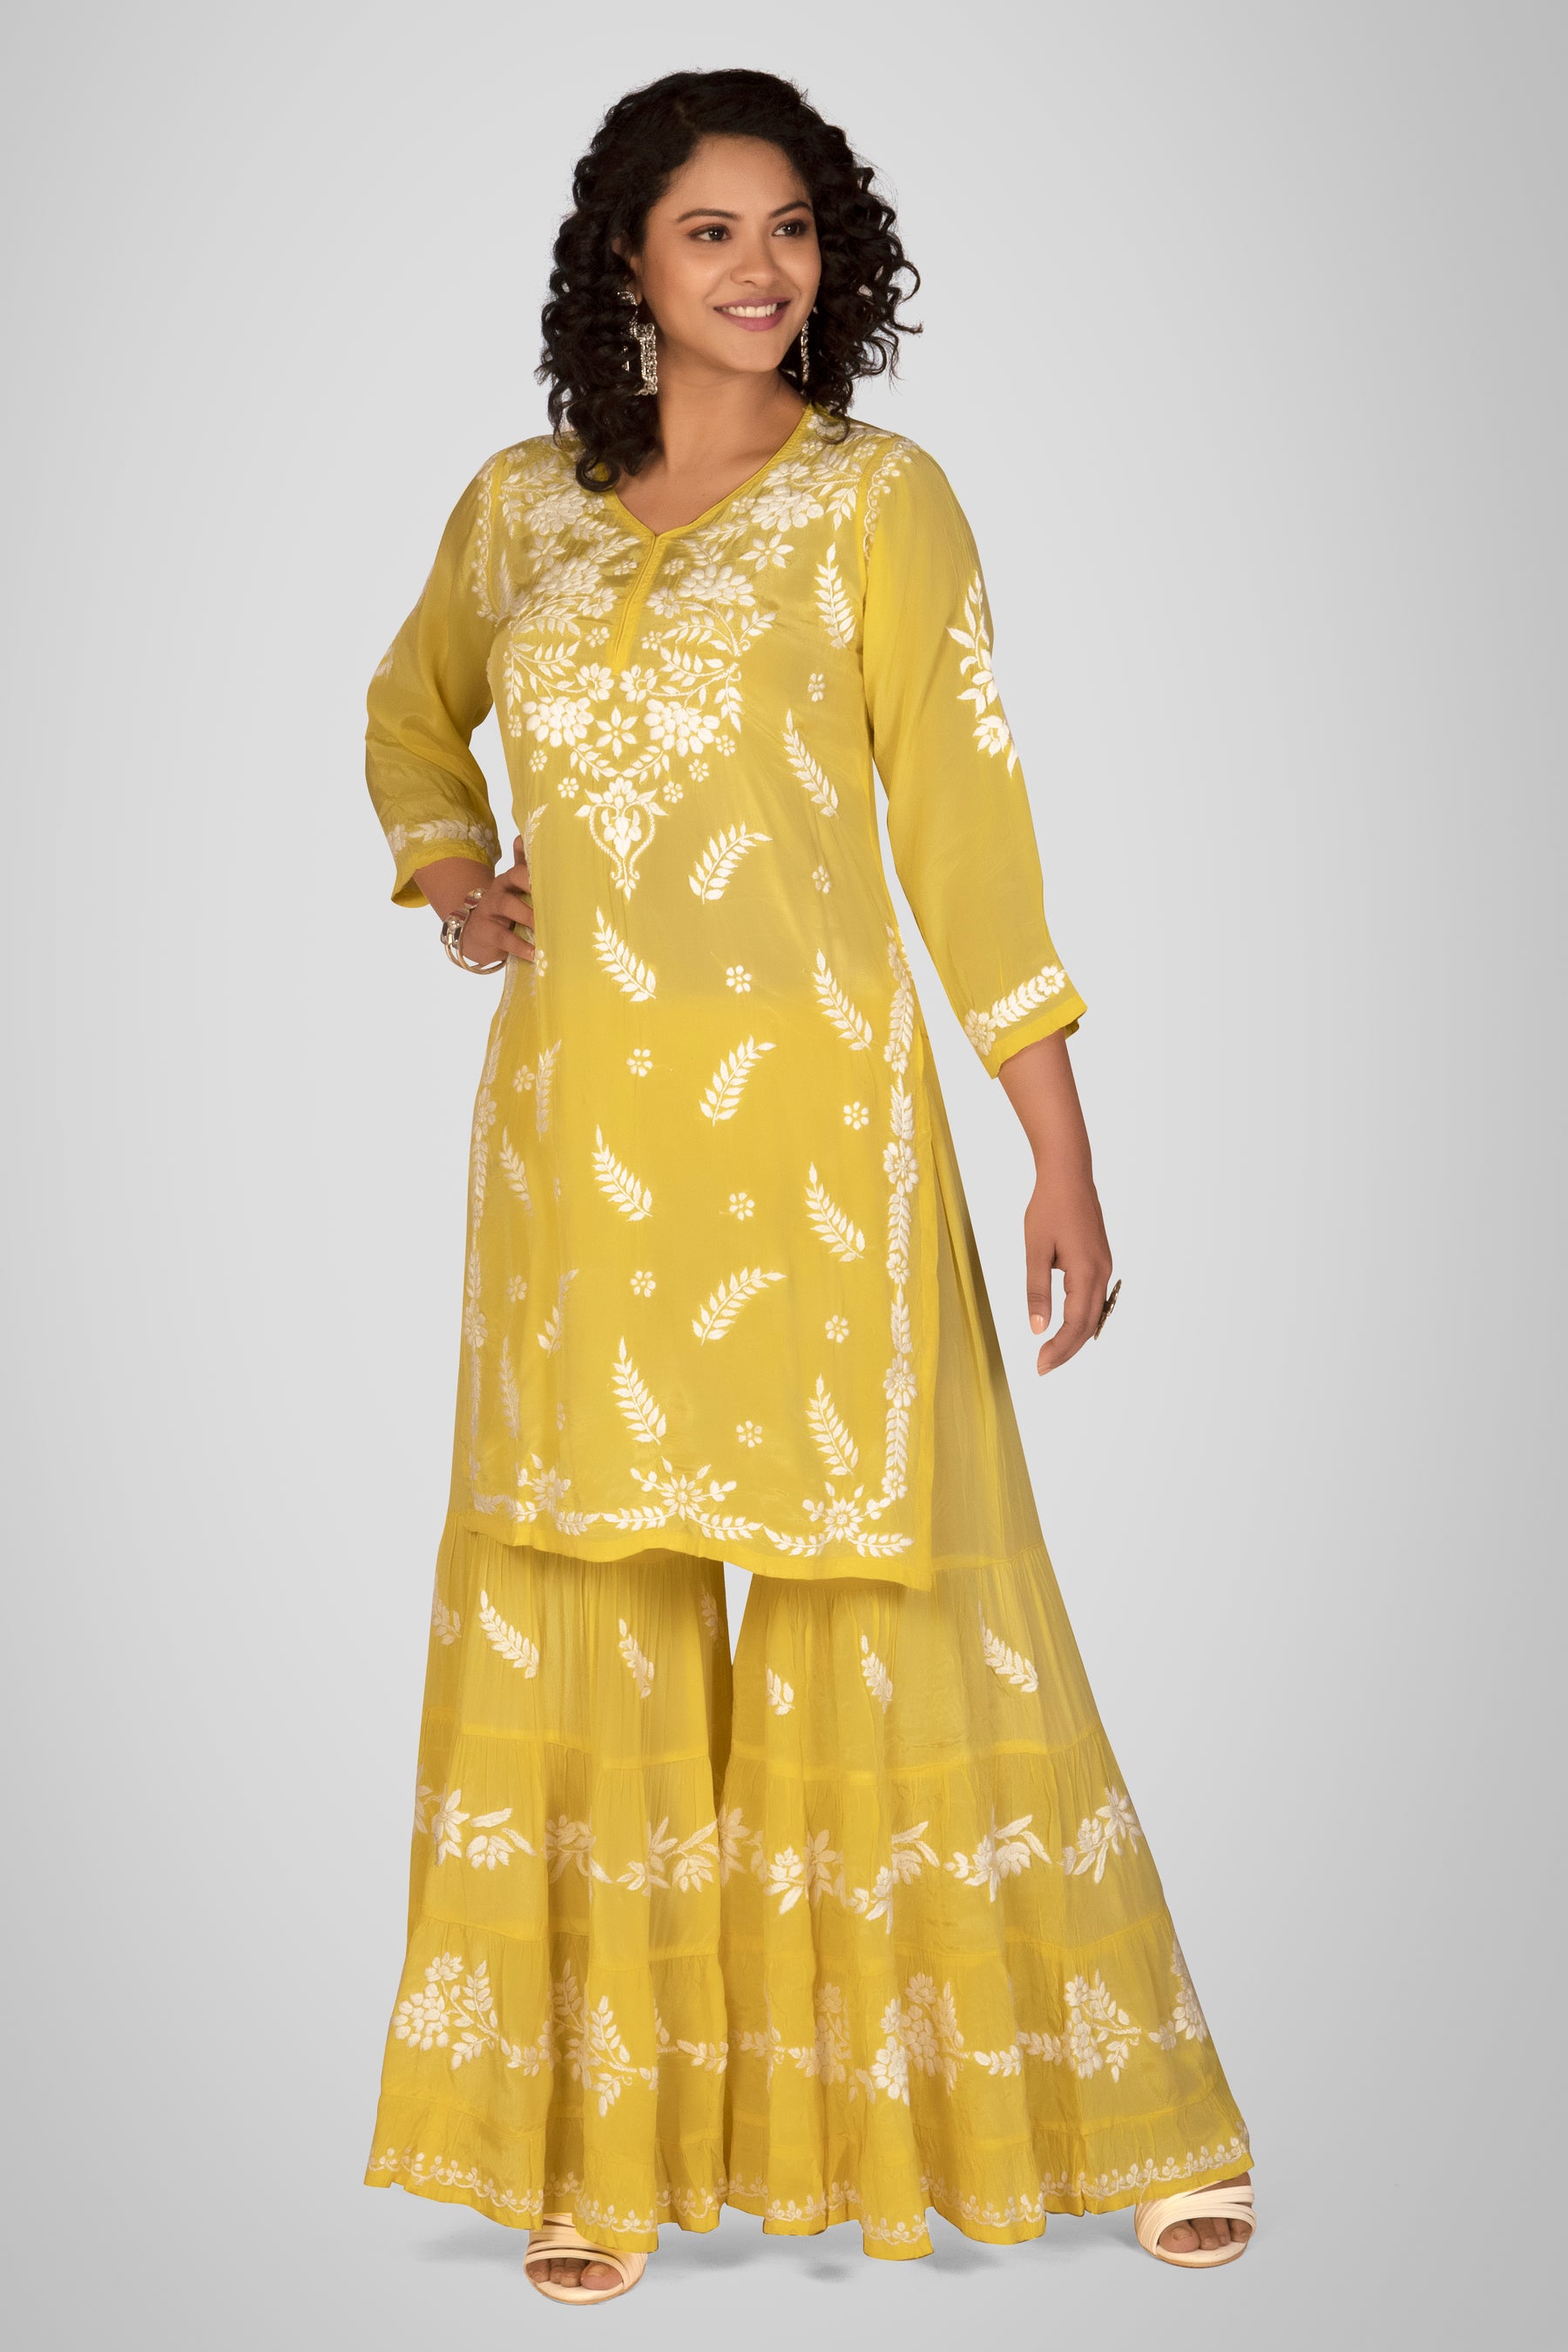 https://inshacreationsnx.com/collections/coords-sets/products/crepe-gharara-set?variant=44509521019126